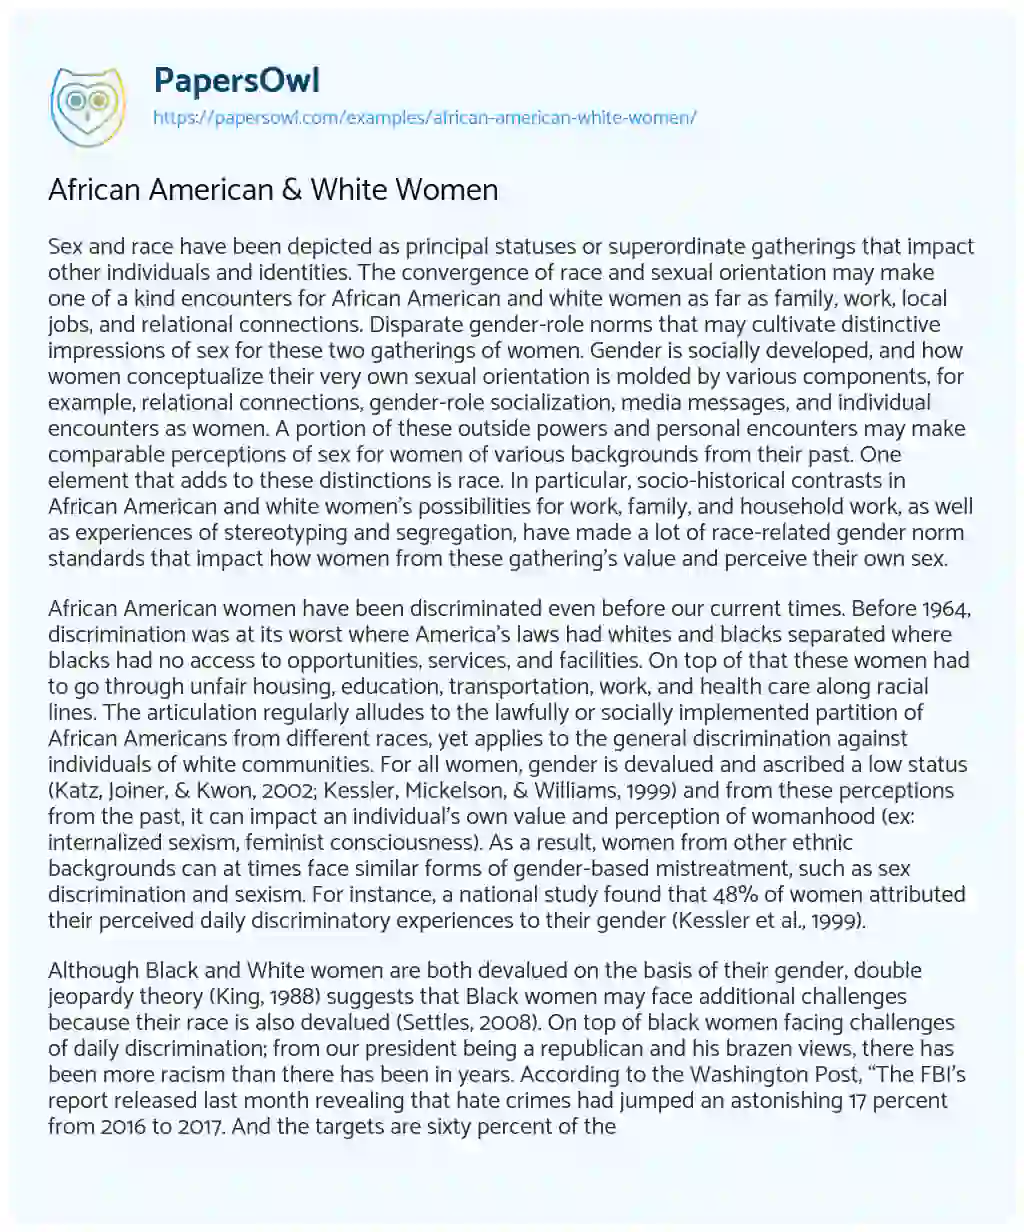 Essay on African American & White Women